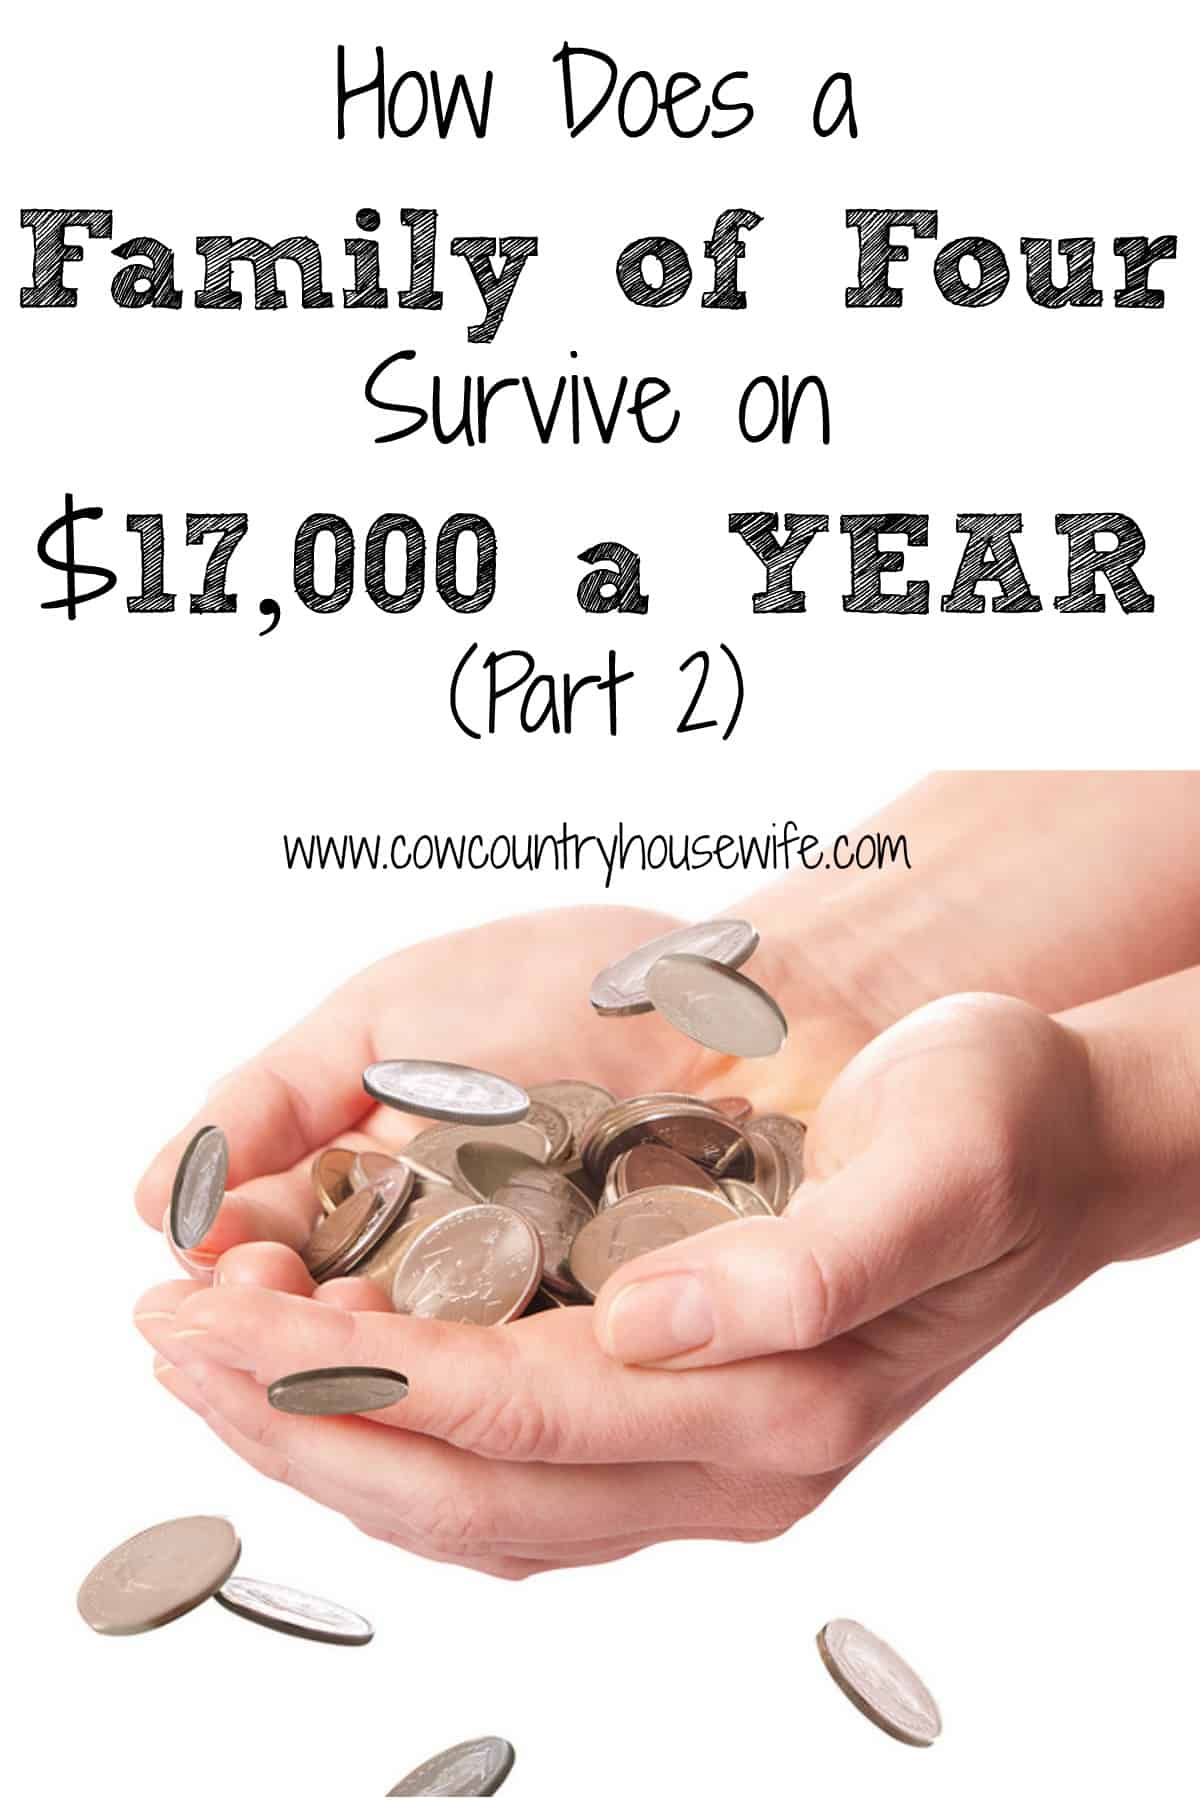 How Does a Family of Four Survive on $17,000 a YEAR (Part 2) www.cowcountryhousewife.com